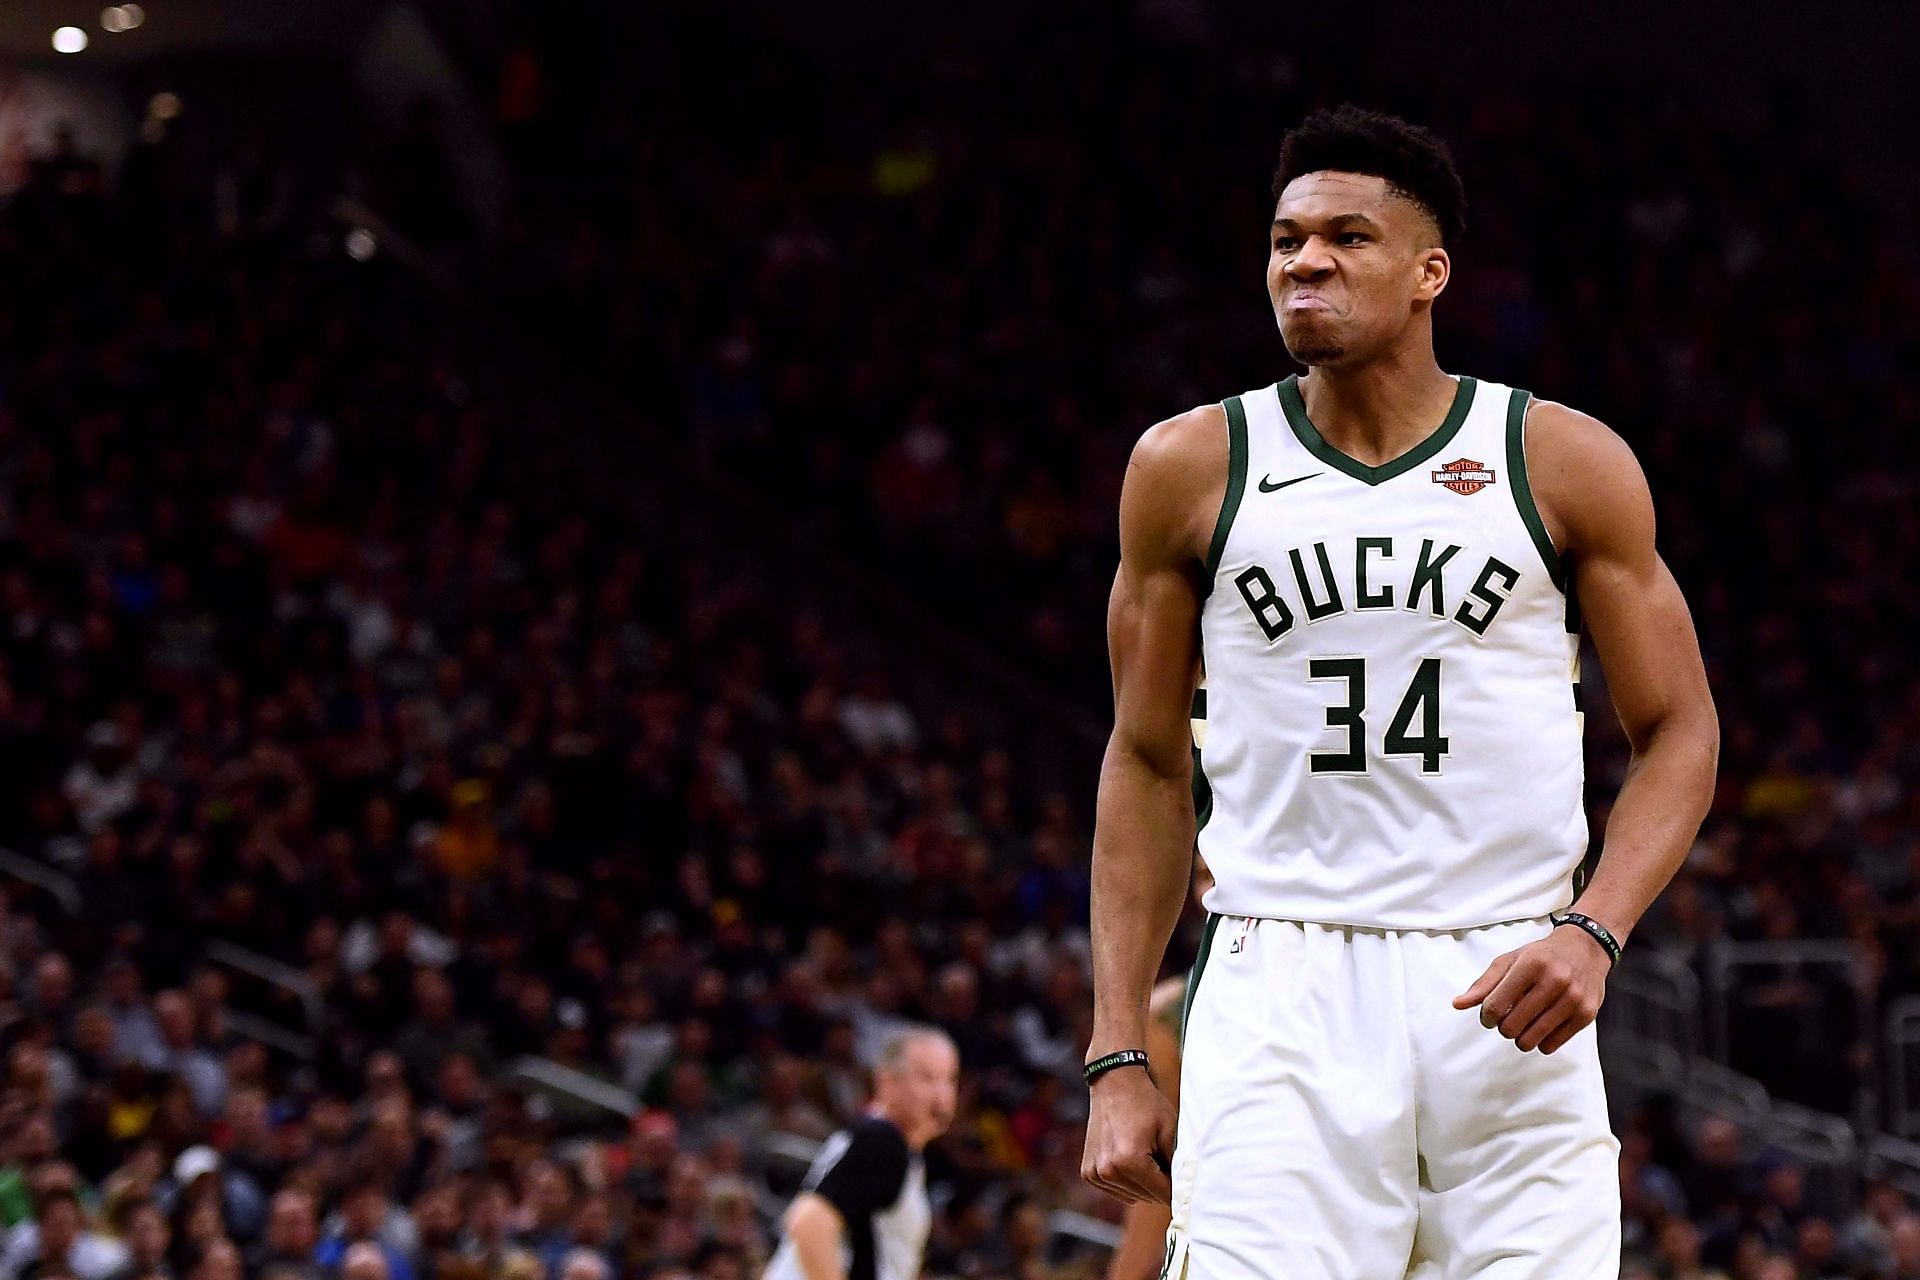 Giannis Antetokounmpo of the Milwaukee Bucks is the highest-rated player in NBA 2K23 with a rating of 97